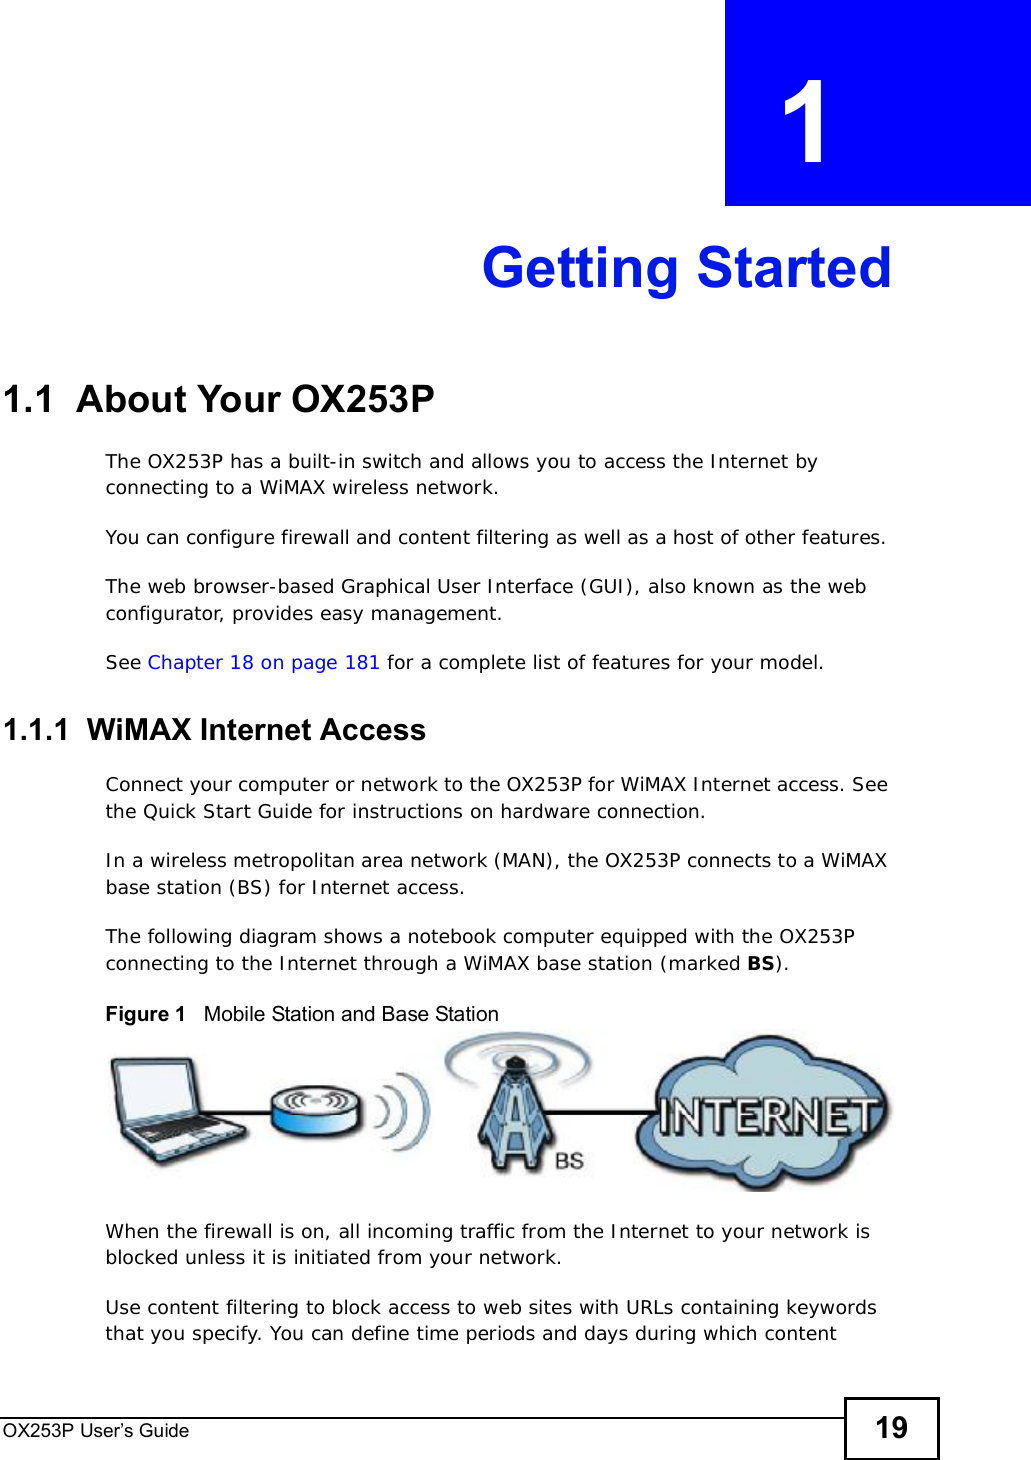 OX253P User’s Guide 19CHAPTER  1 Getting Started1.1  About Your OX253P The OX253P has a built-in switch and allows you to access the Internet by connecting to a WiMAX wireless network. You can configure firewall and content filtering as well as a host of other features. The web browser-based Graphical User Interface (GUI), also known as the web configurator, provides easy management.See Chapter 18 on page 181 for a complete list of features for your model.1.1.1  WiMAX Internet AccessConnect your computer or network to the OX253P for WiMAX Internet access. See the Quick Start Guide for instructions on hardware connection.In a wireless metropolitan area network (MAN), the OX253P connects to a WiMAX base station (BS) for Internet access. The following diagram shows a notebook computer equipped with the OX253P connecting to the Internet through a WiMAX base station (marked BS).Figure 1   Mobile Station and Base StationWhen the firewall is on, all incoming traffic from the Internet to your network is blocked unless it is initiated from your network. Use content filtering to block access to web sites with URLs containing keywords that you specify. You can define time periods and days during which content 